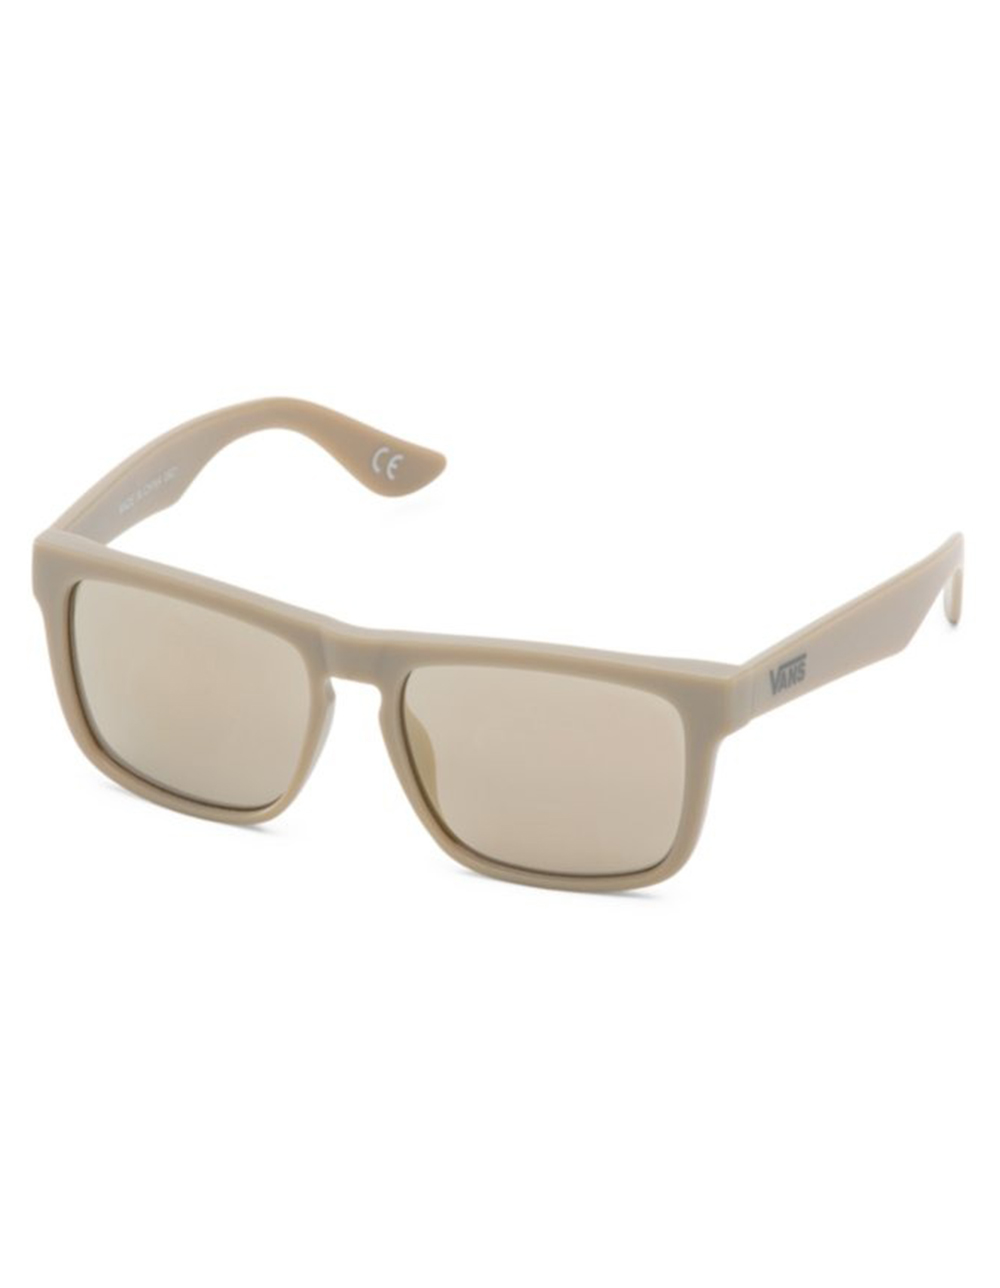 VANS Squared Off | Sunglasses Tillys TAUPE 